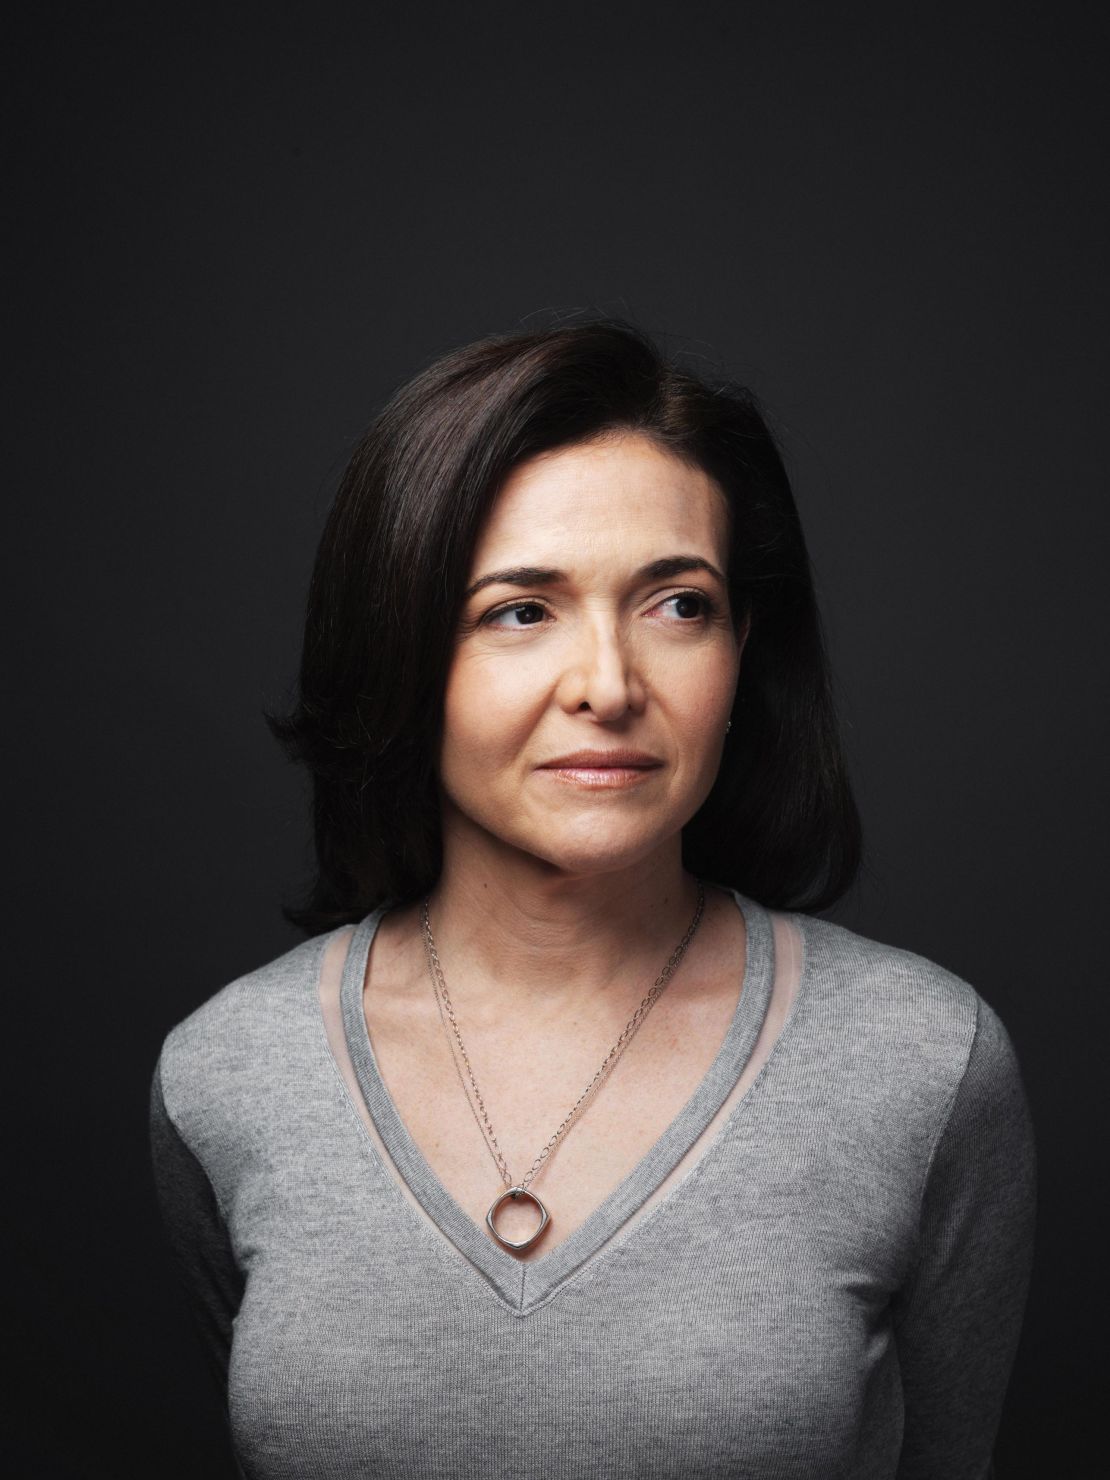 Sheryl Sandberg, Facebook's COO and Mark Zuckerberg's No. 2, has supercharged the company's business strategy. 